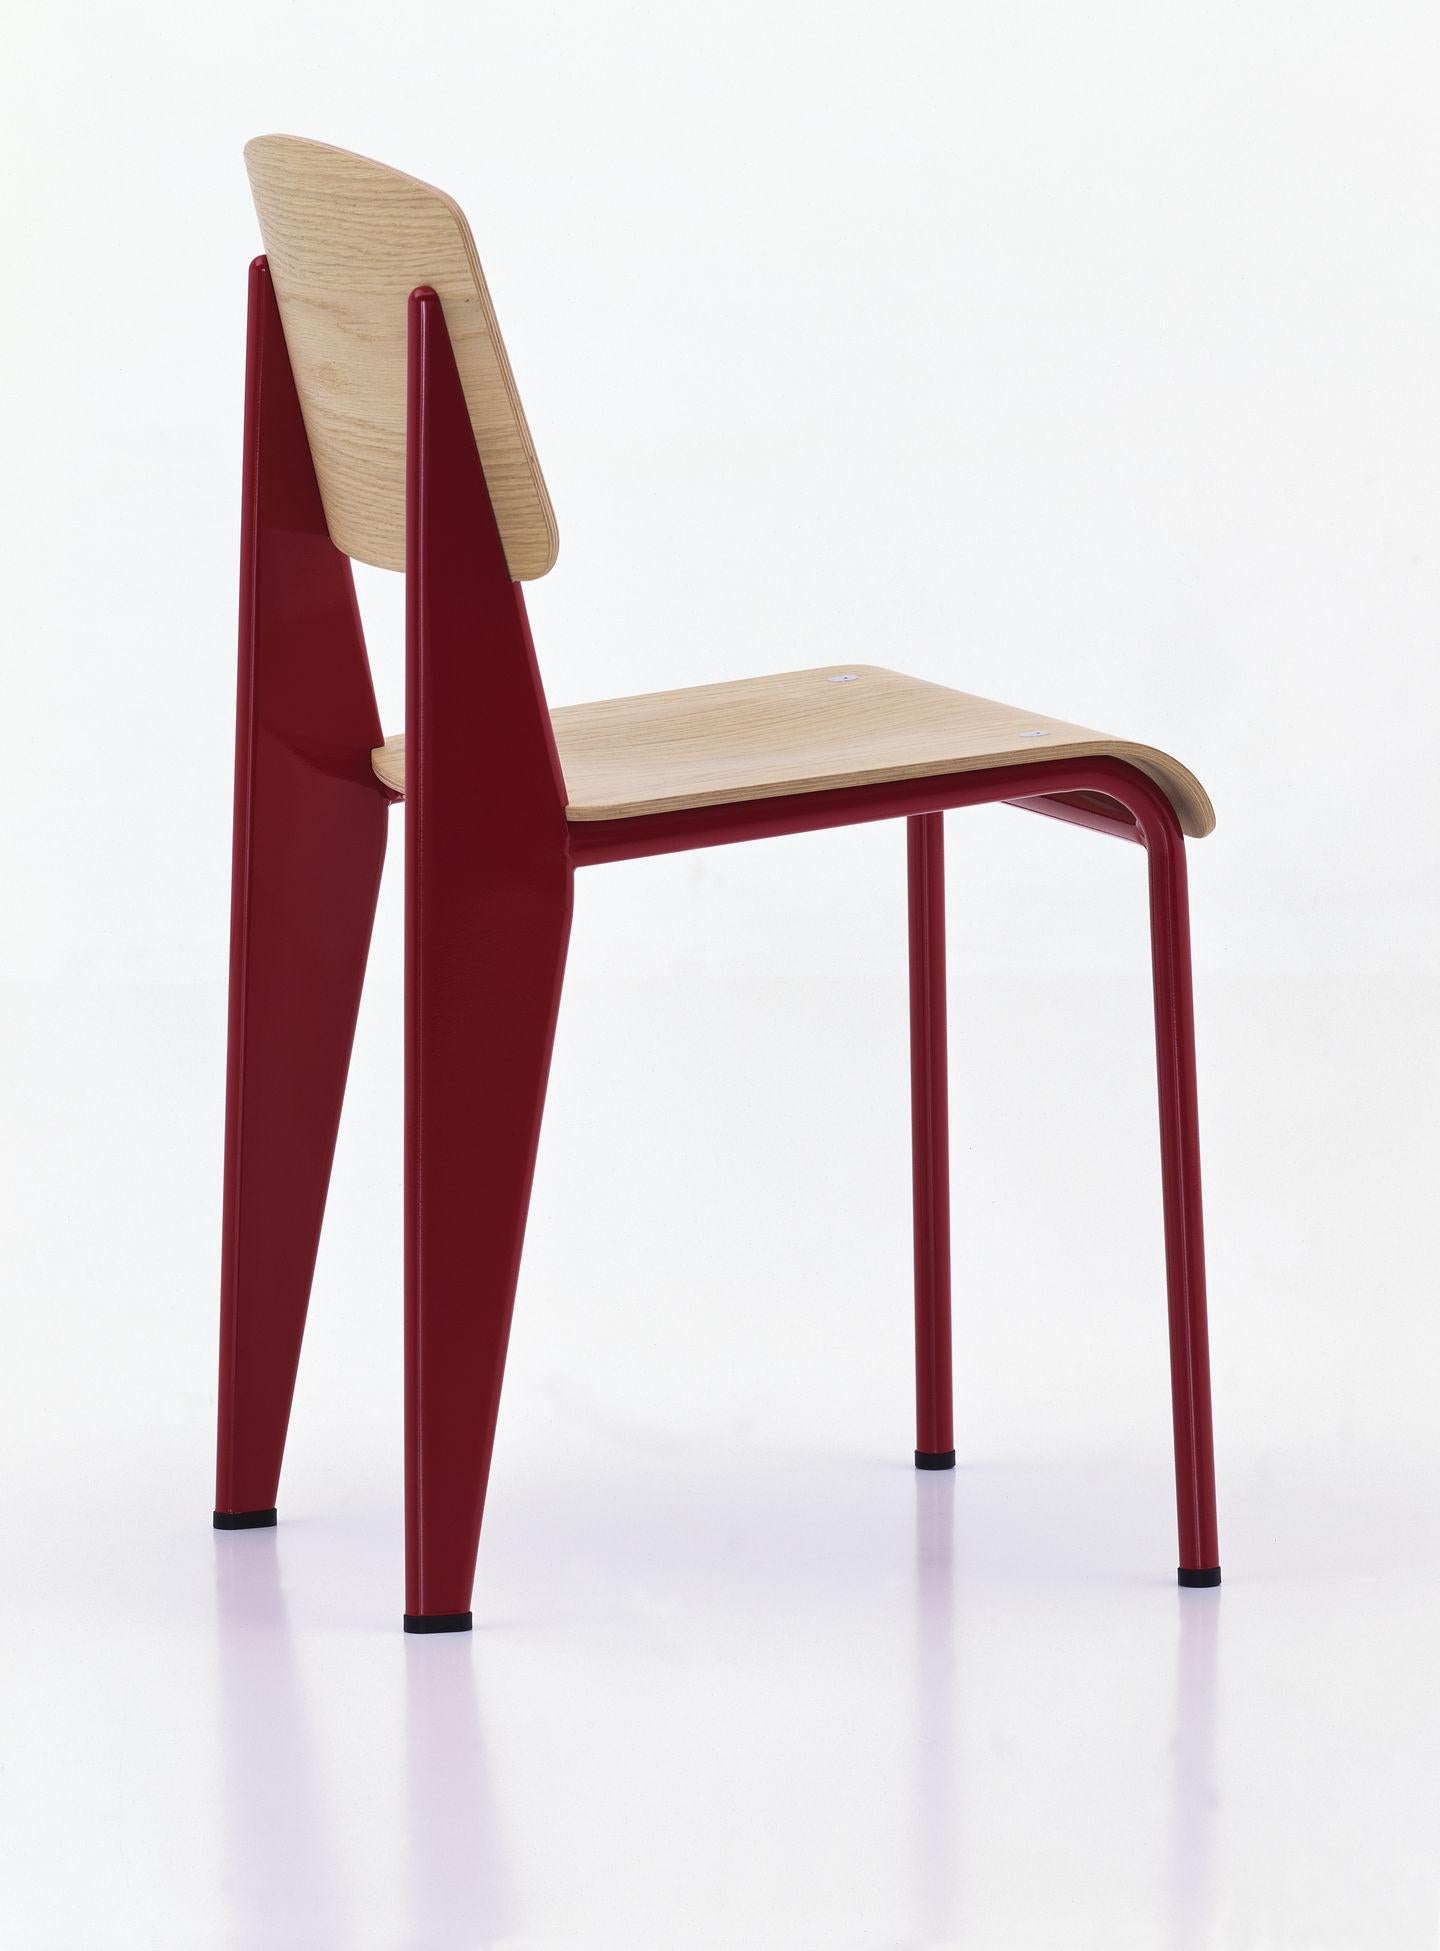 Mid-Century Modern Jean Prouvé Standard Chair by Vitra